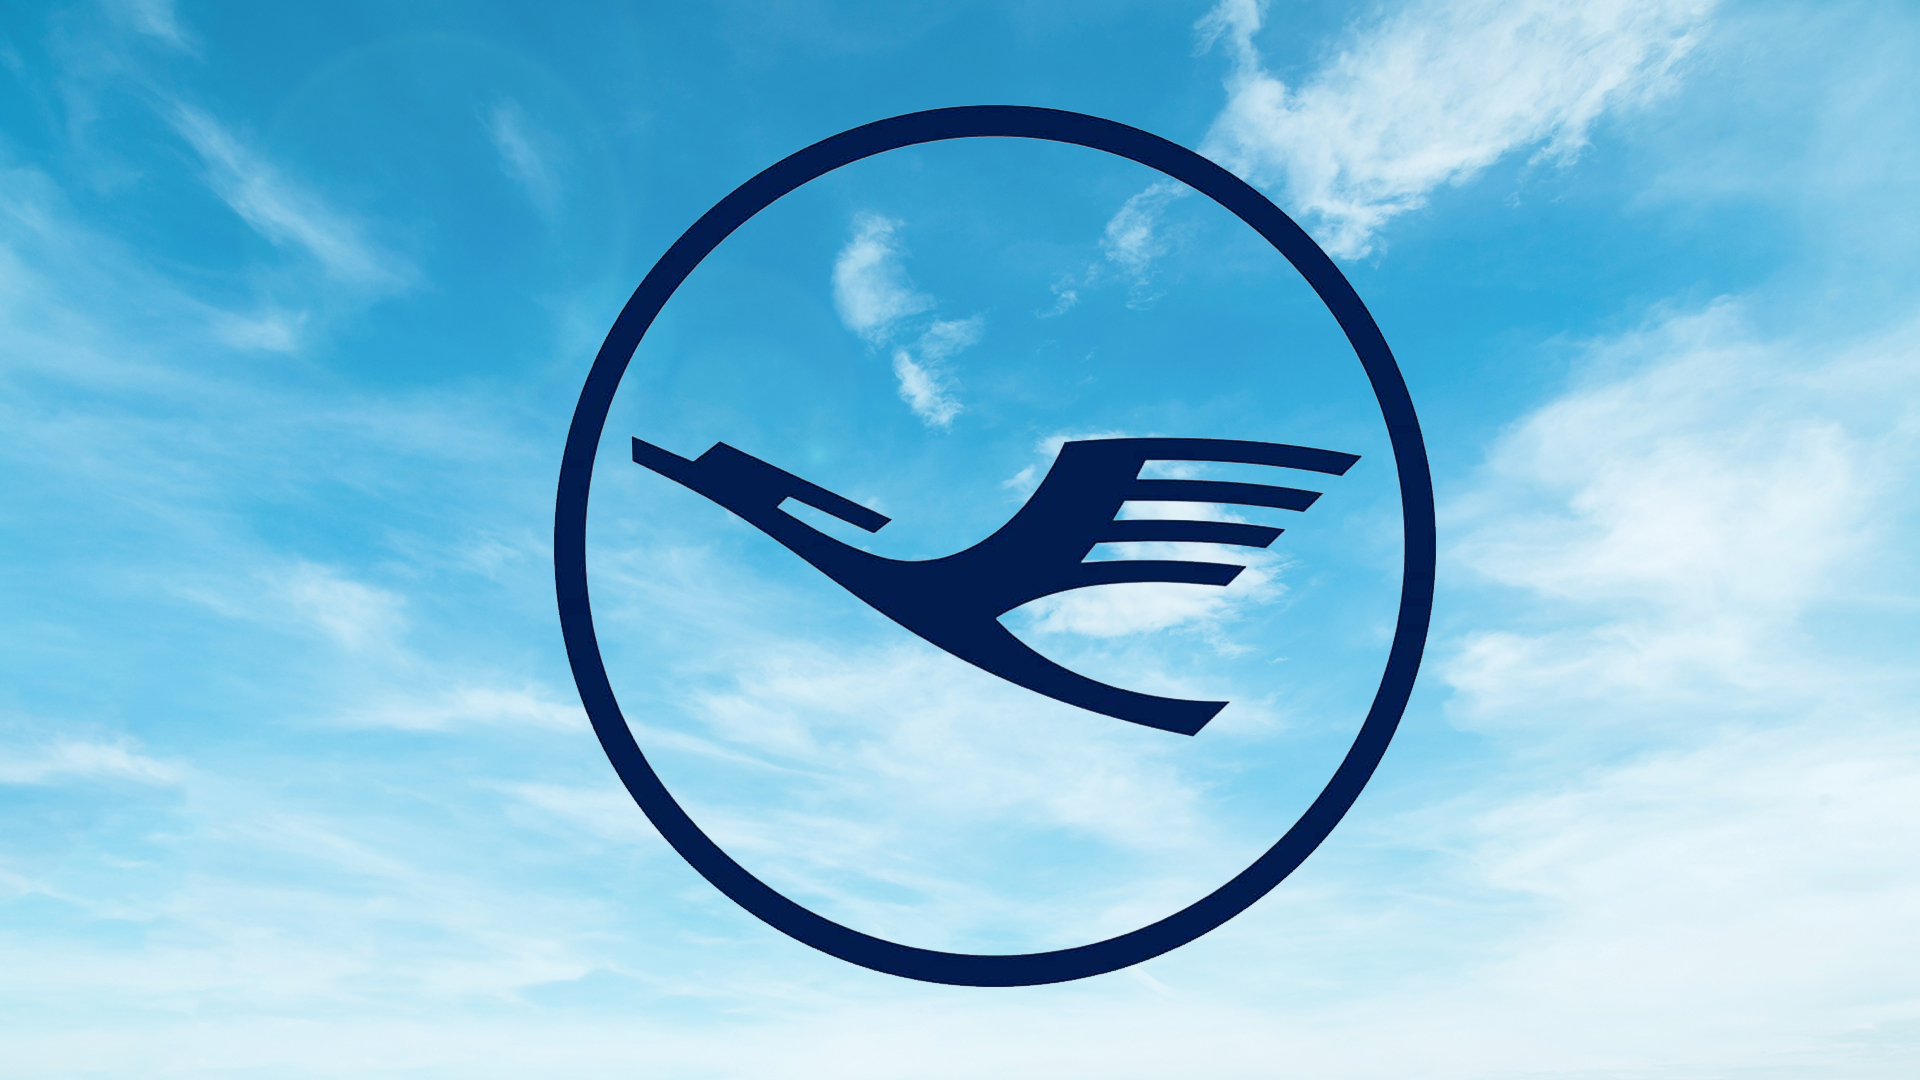 Airline Logos Quiz - Can You Guess Them All Correctly? - ProProfs Quiz